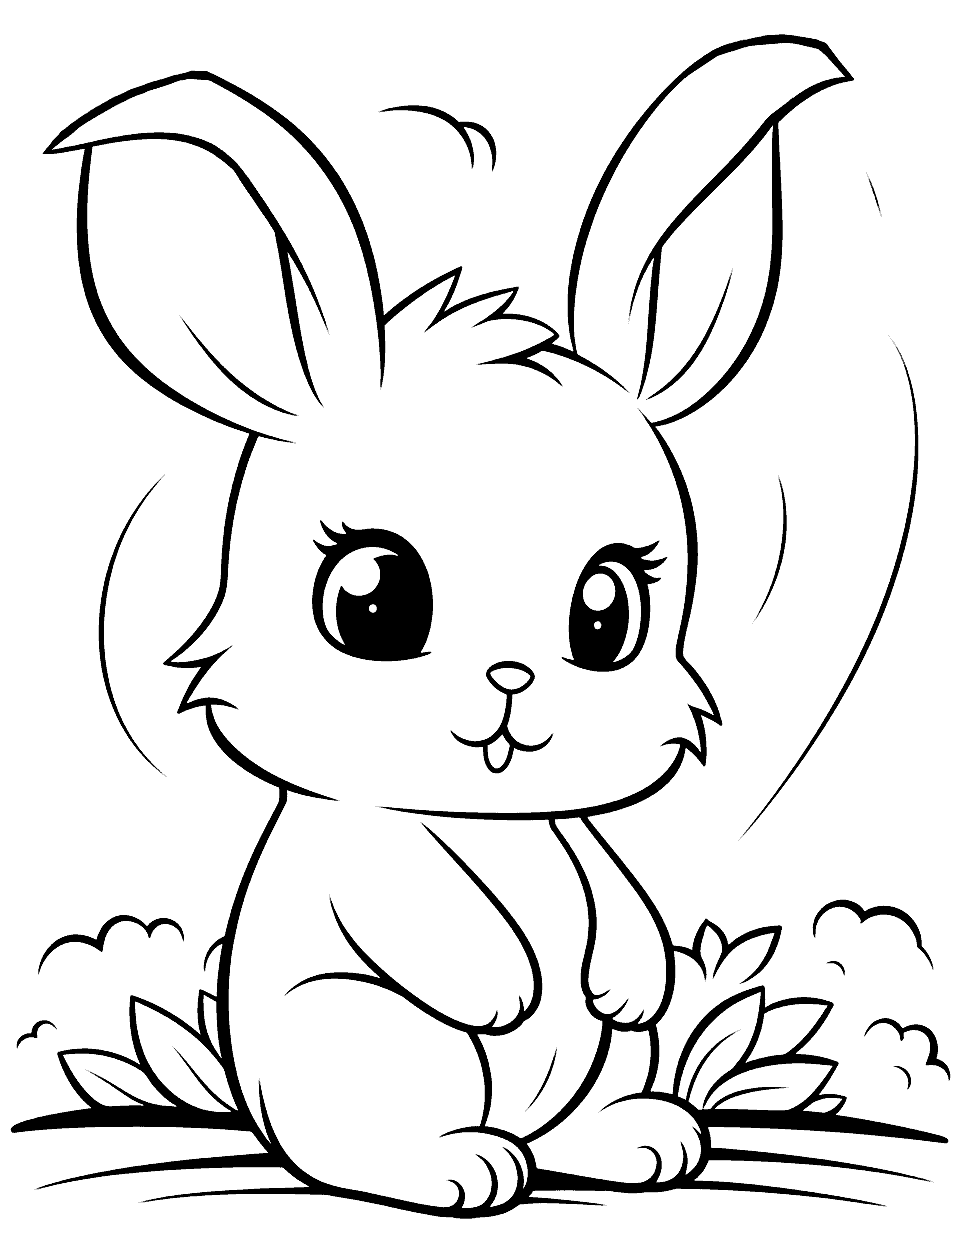 Adorable Chibi Bunny  Coloring Page - An overly cute chibi bunny, eyes wide with delight.